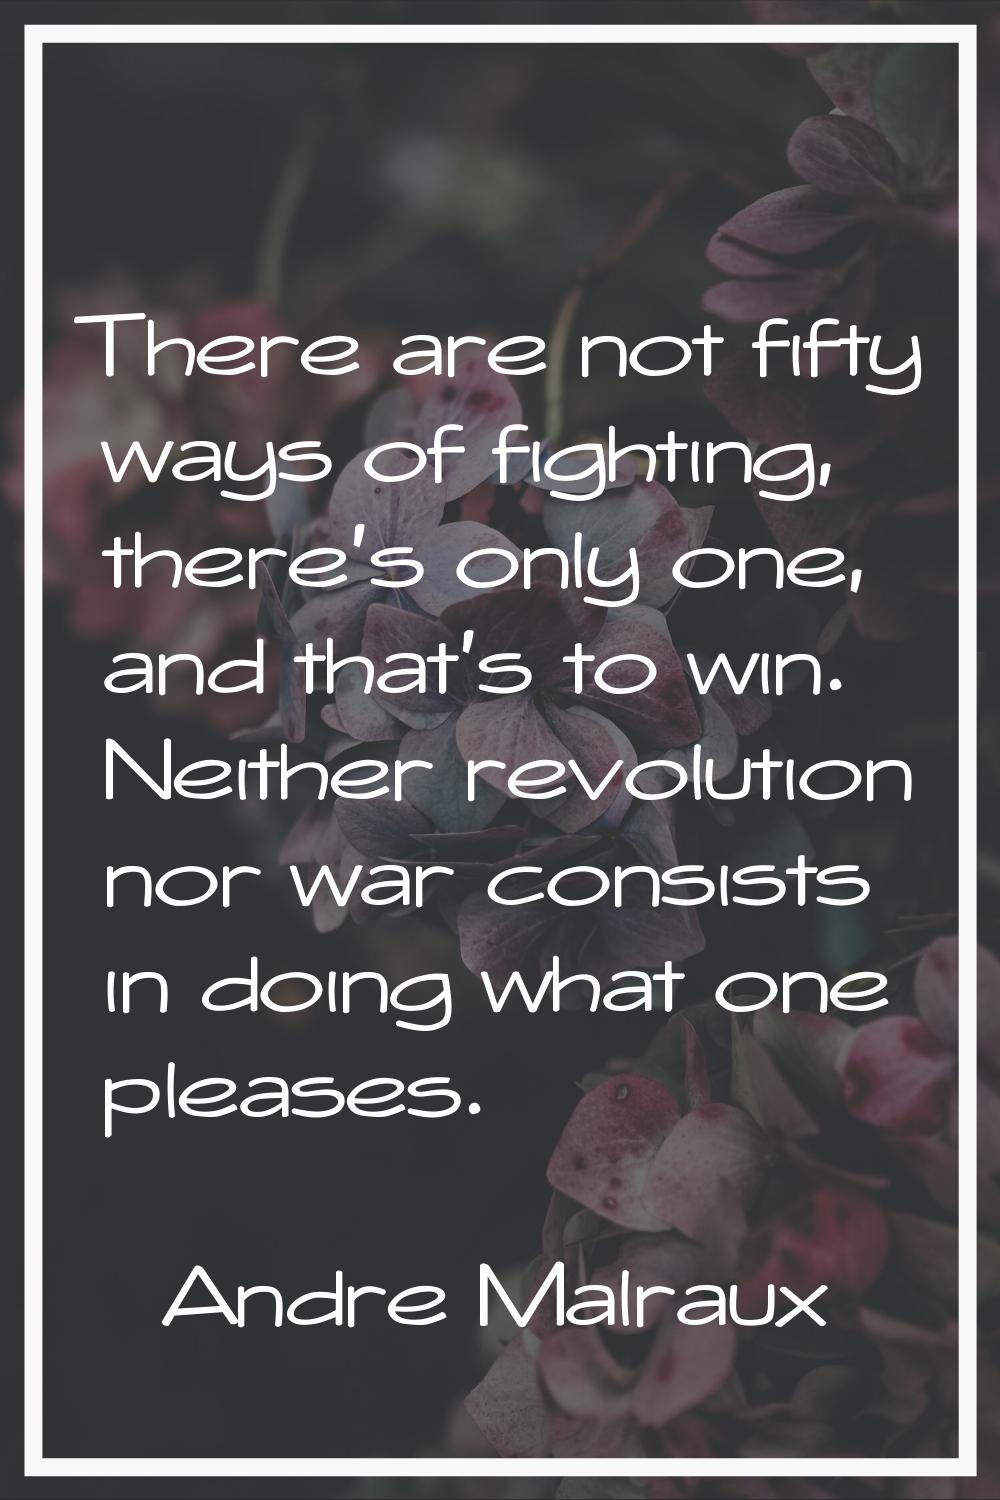 There are not fifty ways of fighting, there's only one, and that's to win. Neither revolution nor w